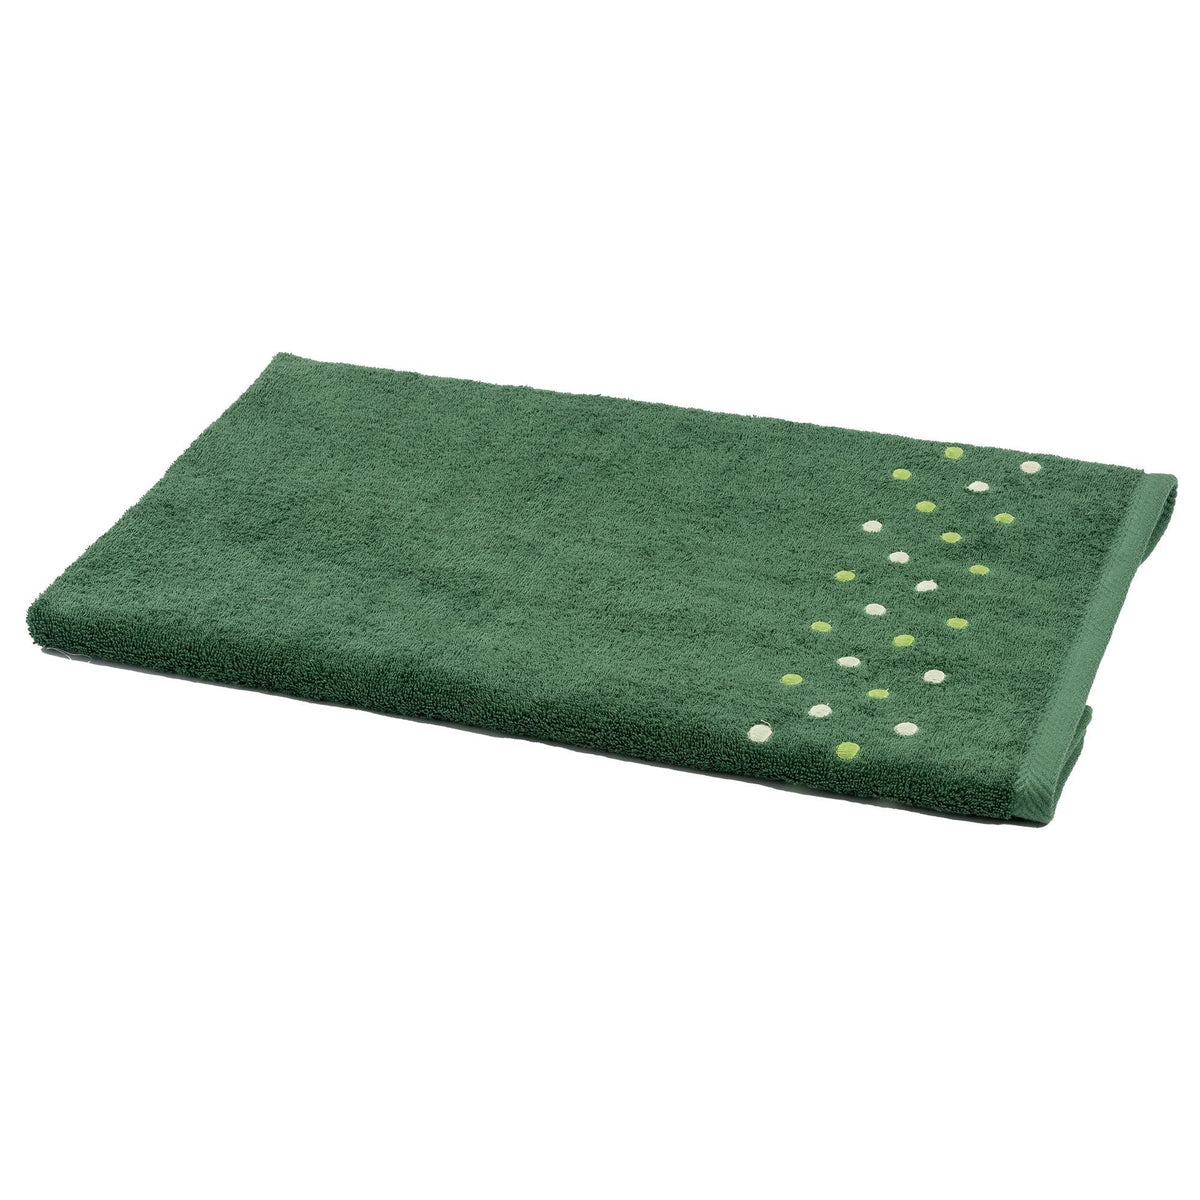 Towels in Terry Cotton with Embroidered Polka Dots - Coriandoli